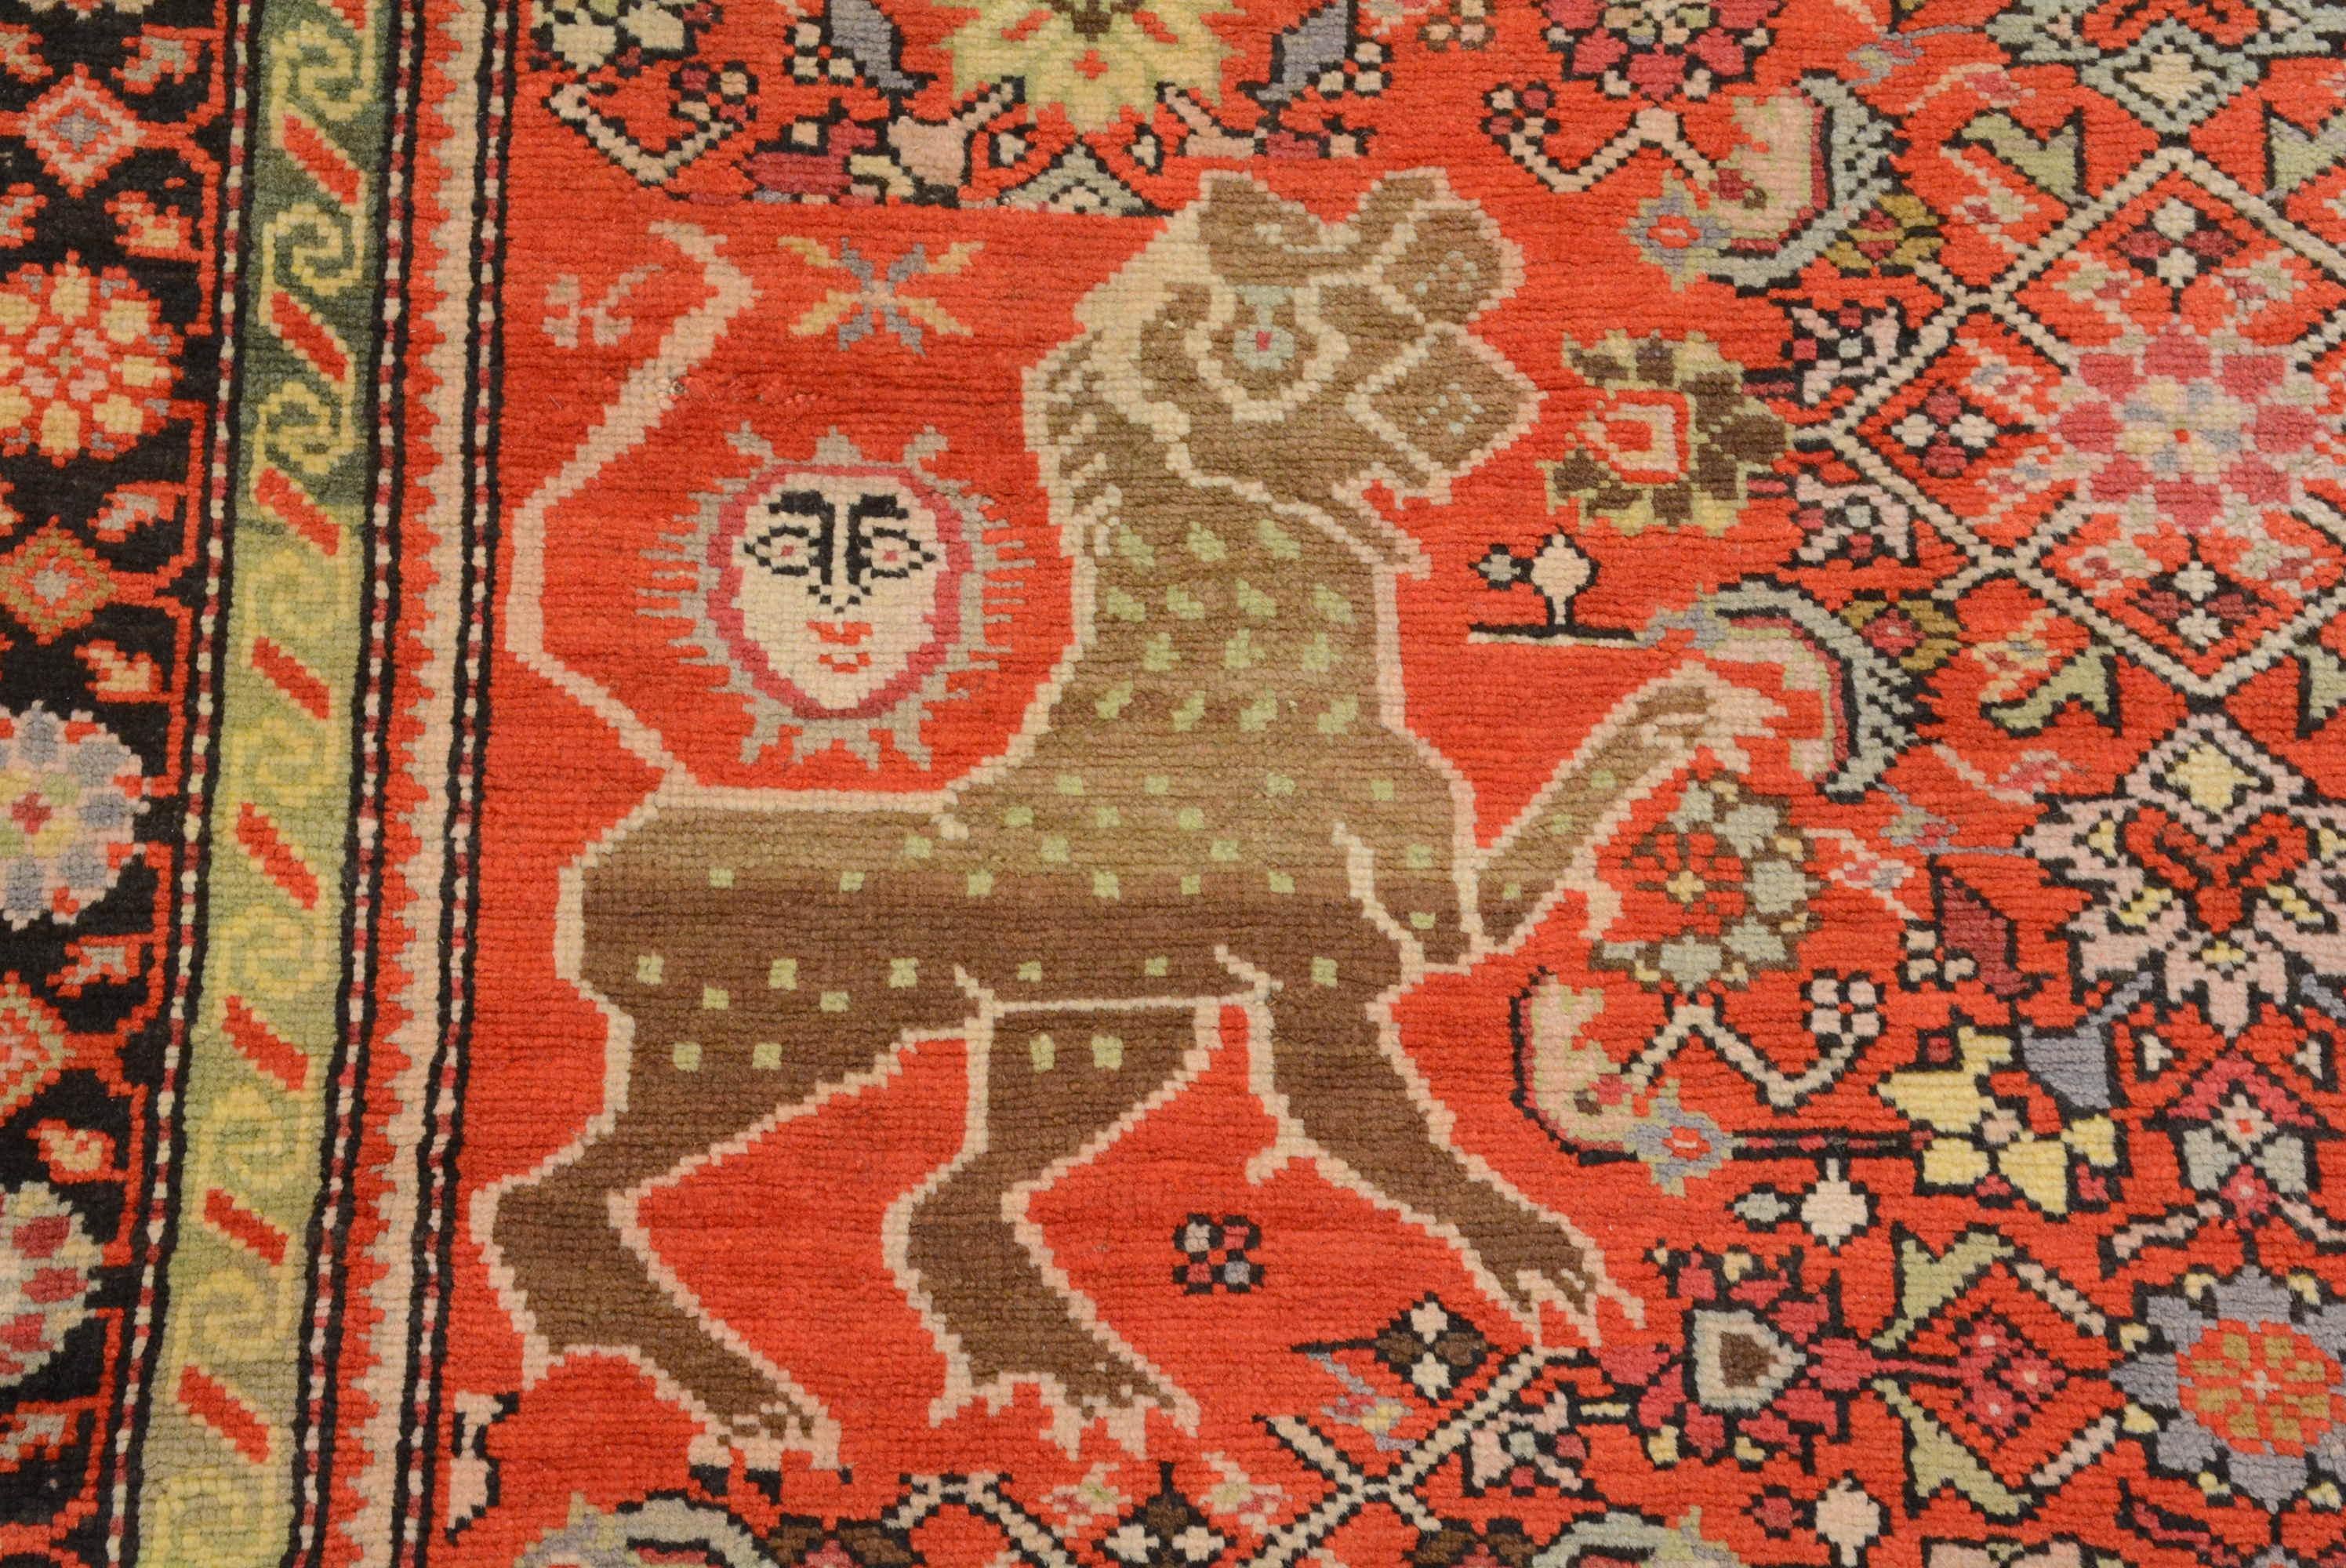 The Karabagh region in the southern Caucasus has produced carpets since the 13th Century. It is an area populated by Christian Armenians, Kurds, Azeri Turks, and Muslims. Rug production developed significantly during the second half of the 19th